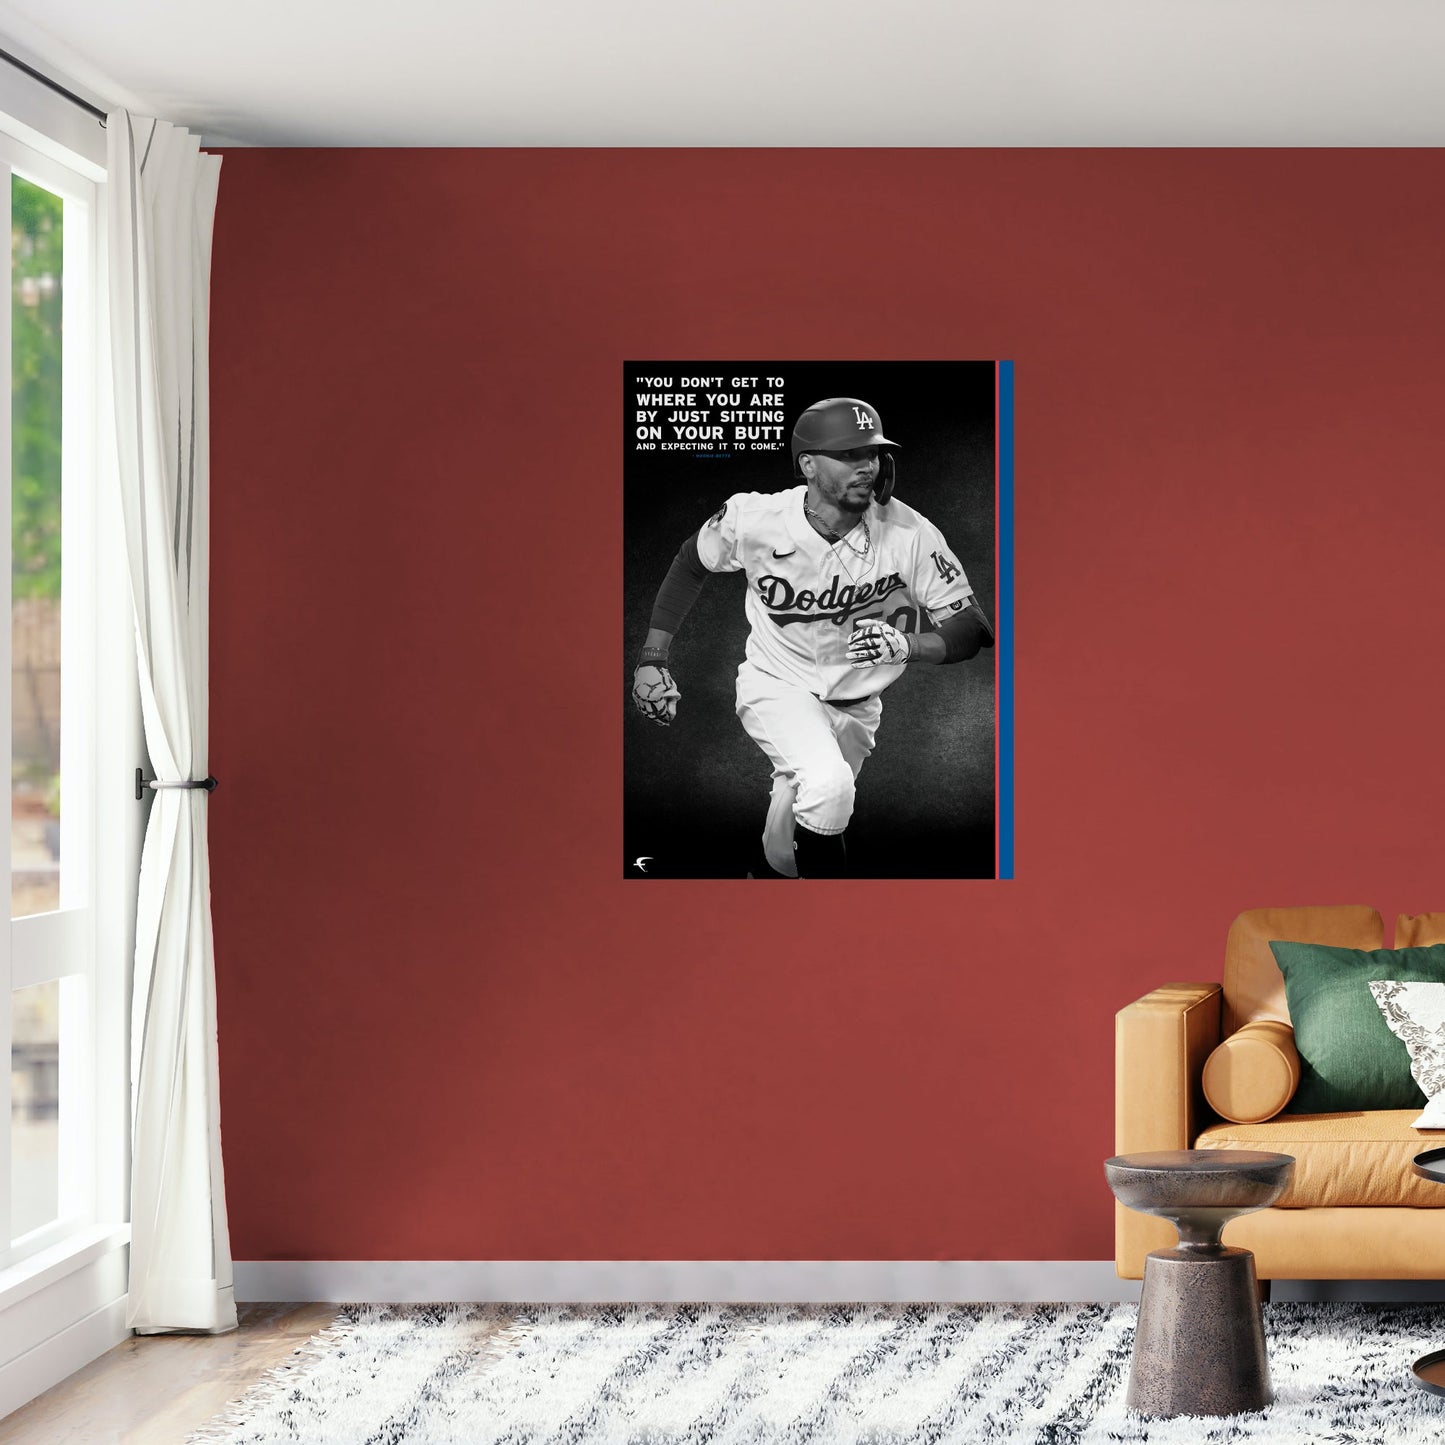 Los Angeles Dodgers: Mookie Betts Inspirational Poster - Officially Licensed MLB Removable Adhesive Decal